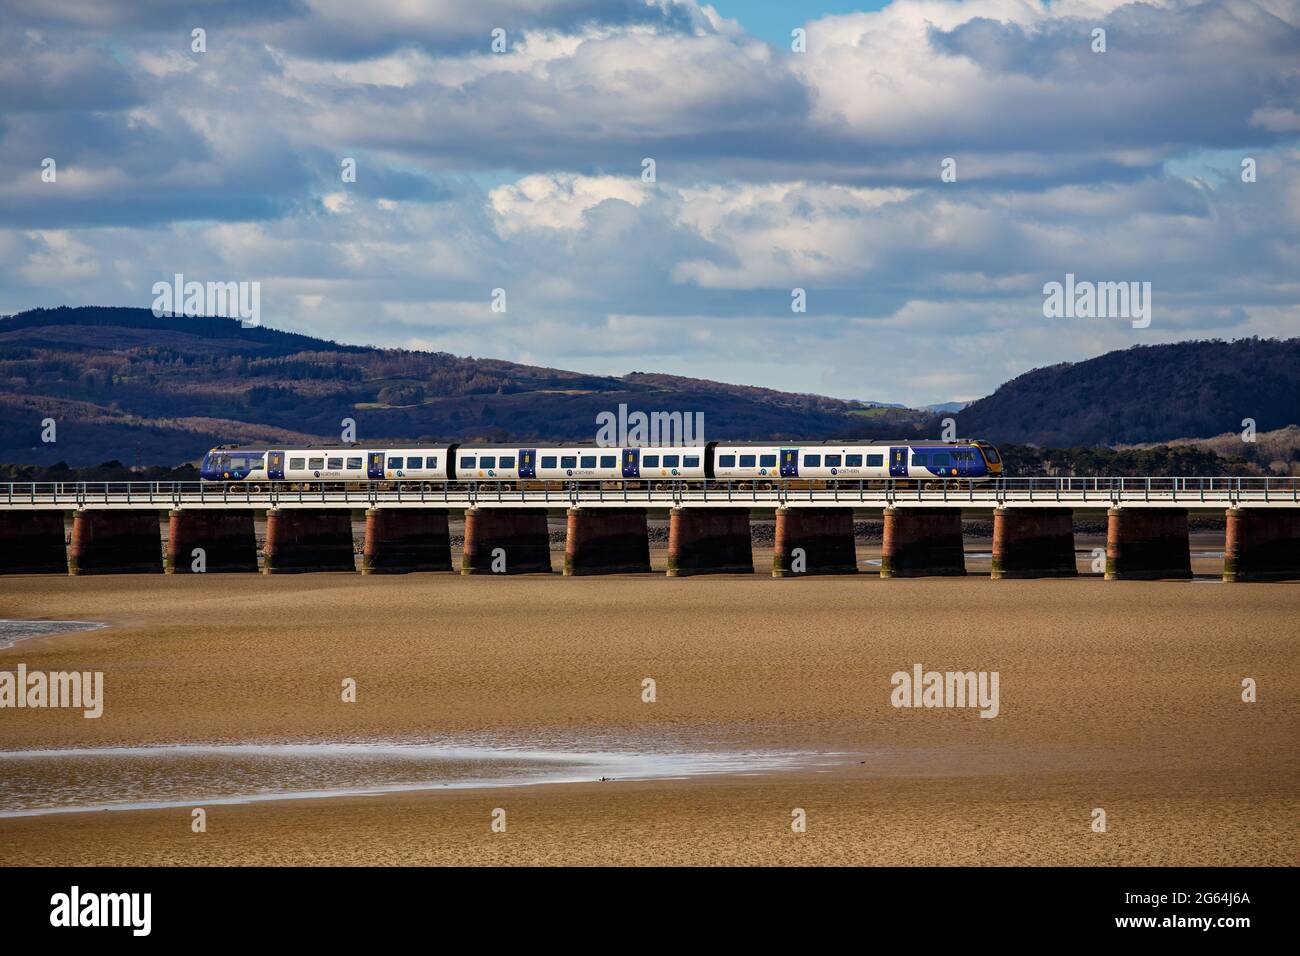 FILE IMAGE: Arnside Viaduct, Cumbria Unit Kingdom CAF Class 195 three car train. THe final Class 195 Civity train for Northern Trains was delivered in December 2020, completing an order, awarded in 2016, for 25 two-car and 33 three-car set trains. These trains join a fleet of 43 Class 331 units which have also entered into service giving a combined order for Northern of 101 trains.Credit: PN News/Alamy Live News  Stock Photo